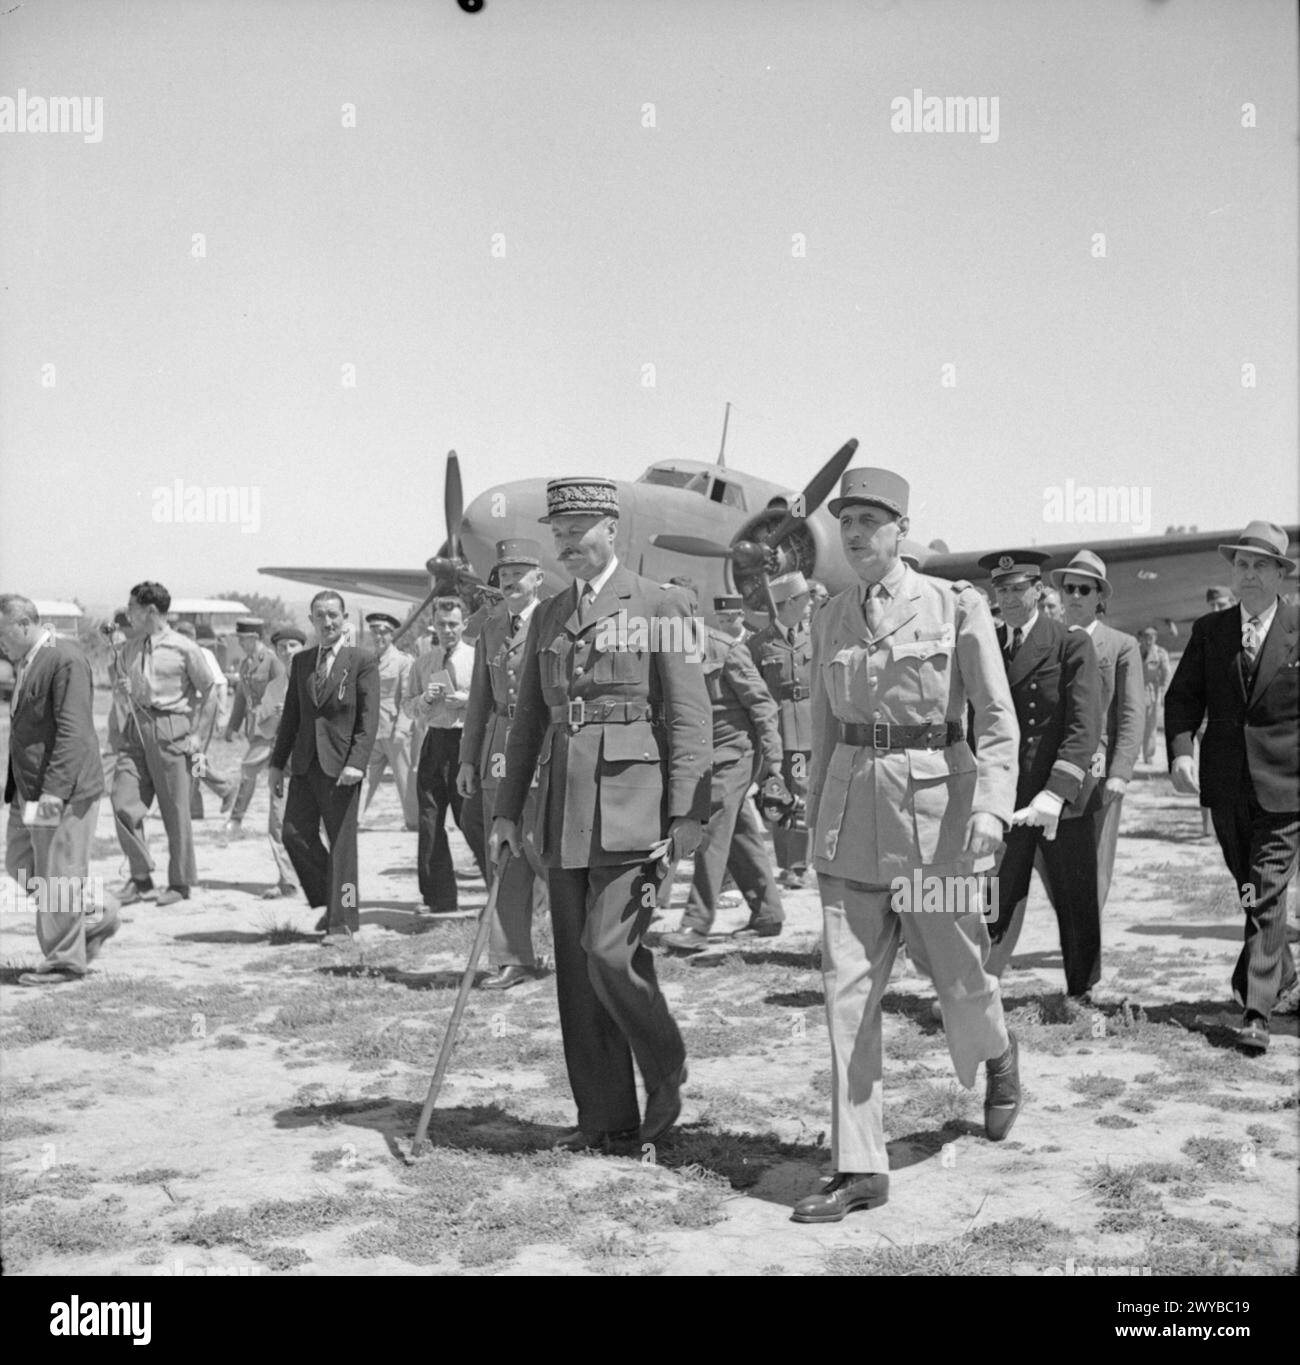 THE FREE FRENCH DURING THE SECOND WORLD WAR - General de Gaulle with General Giraud walking from his plane following de Gaulle's arrival in North Africa. De Gaulle had travelled for talks with Giraud, Commander in Chief of French Forces in North Africa; these talks resulted in a new French Committee of National Liberation of which de Gaulle and Giraud were joint heads. , Giraud, Henri Honore, de Gaulle, Charles André Joseph Marie Stock Photo